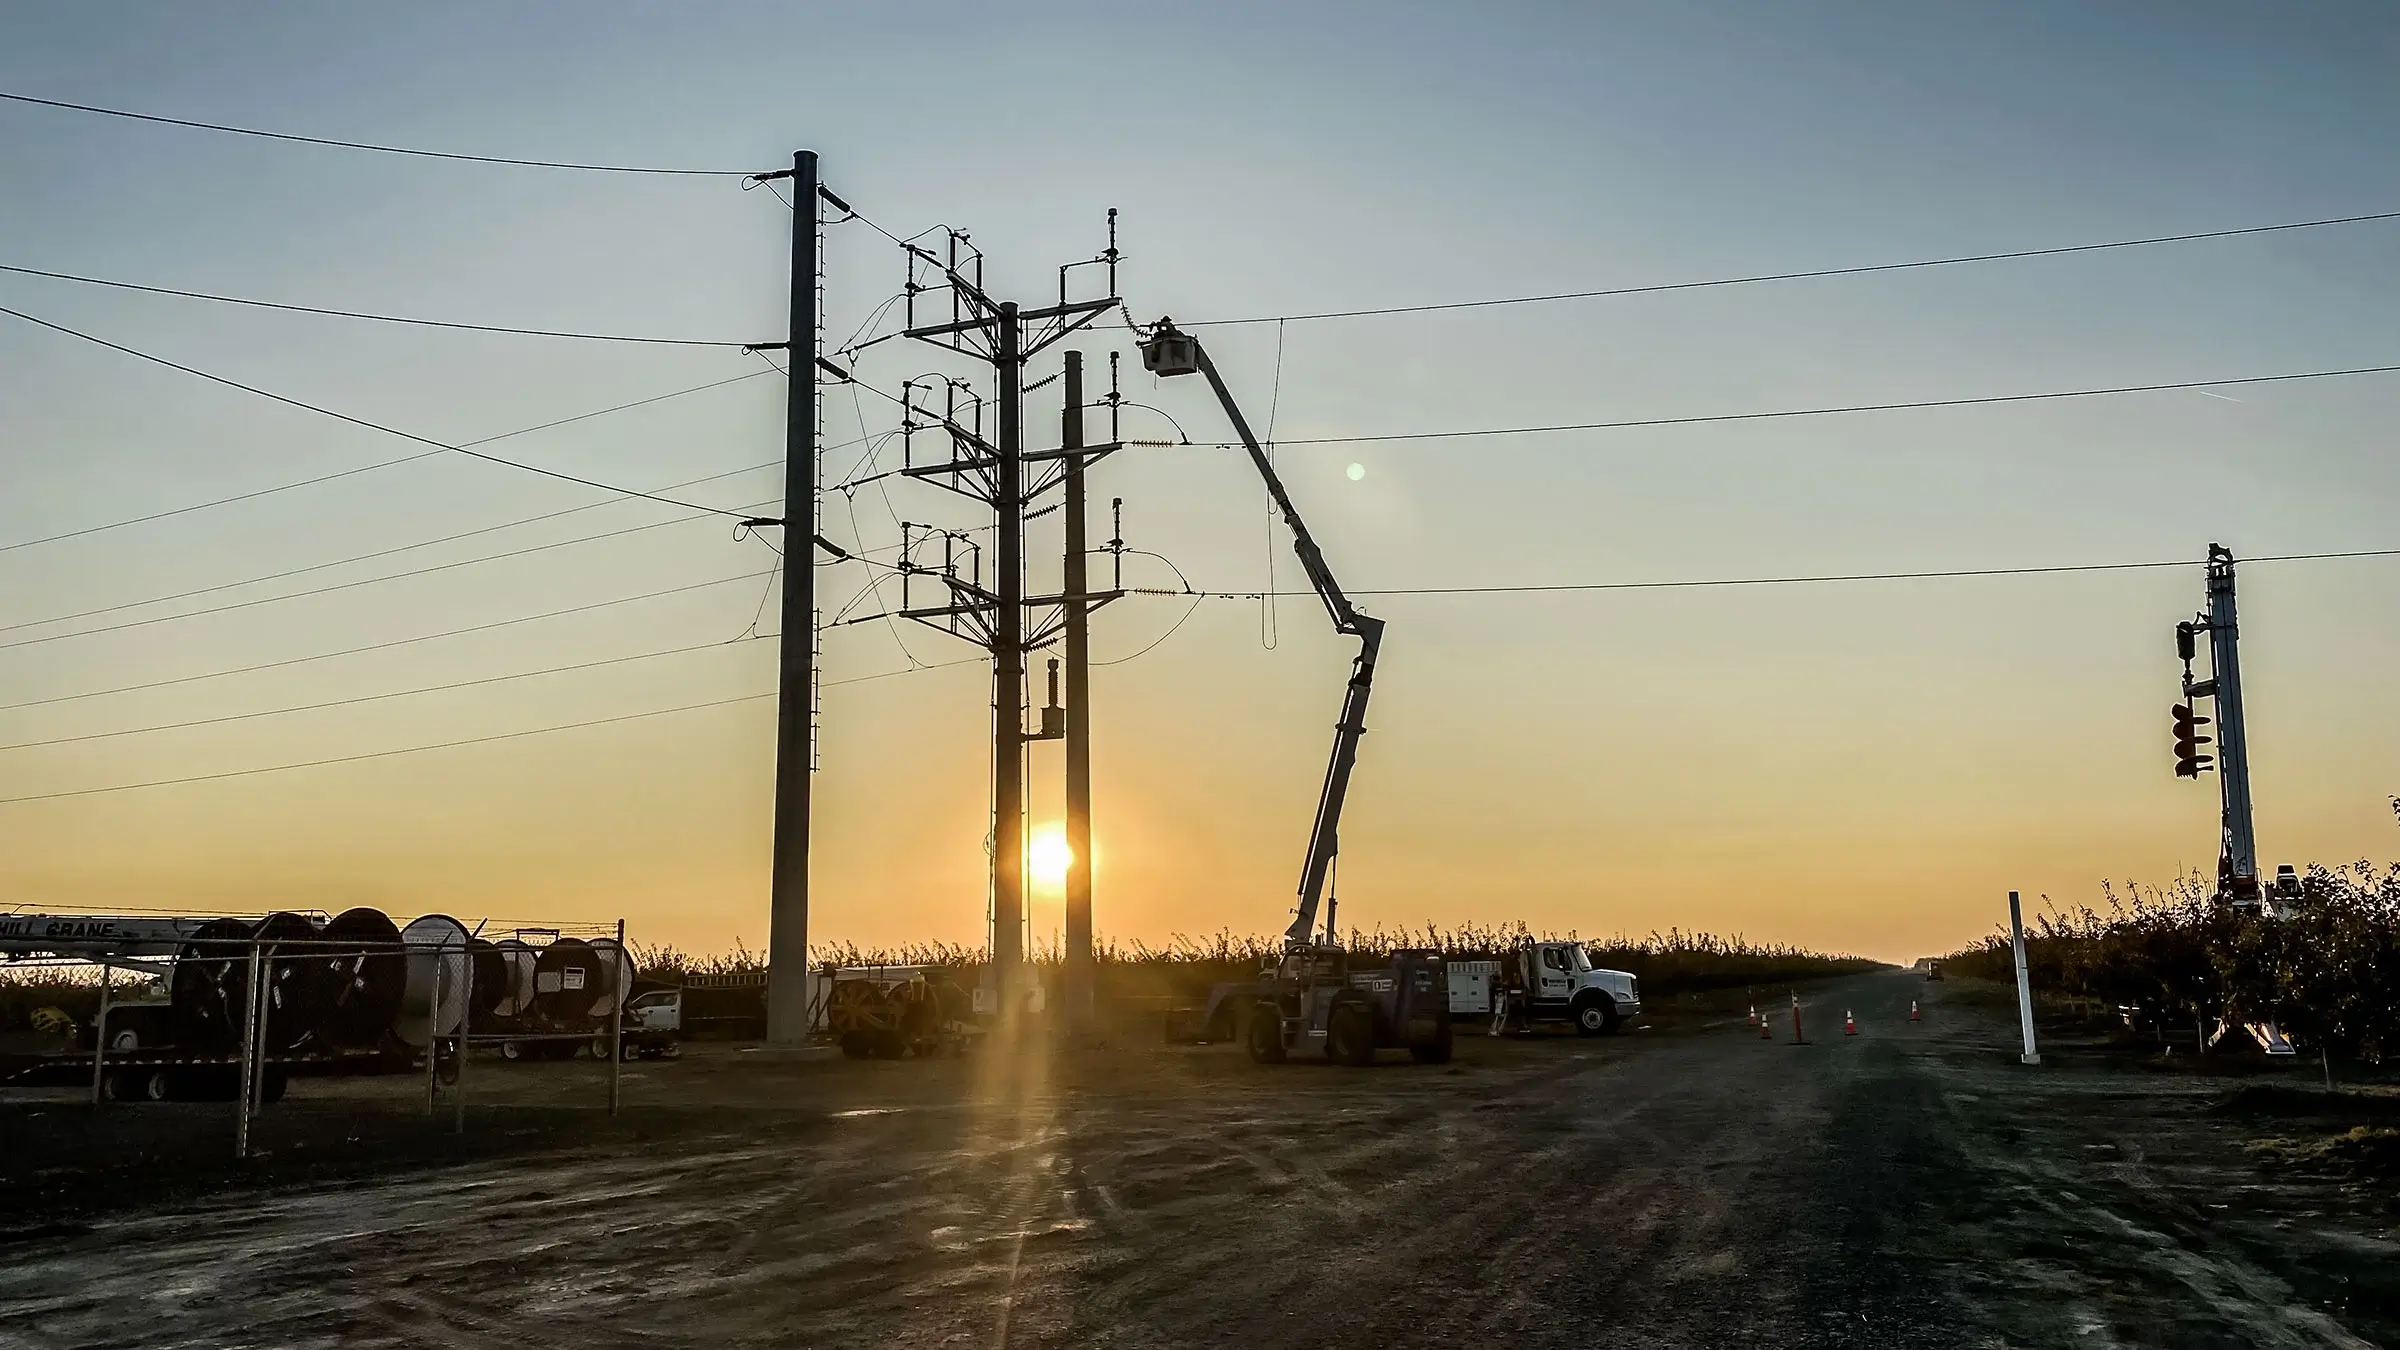 Bucket truck is extended to work on a power pole during golden hour.